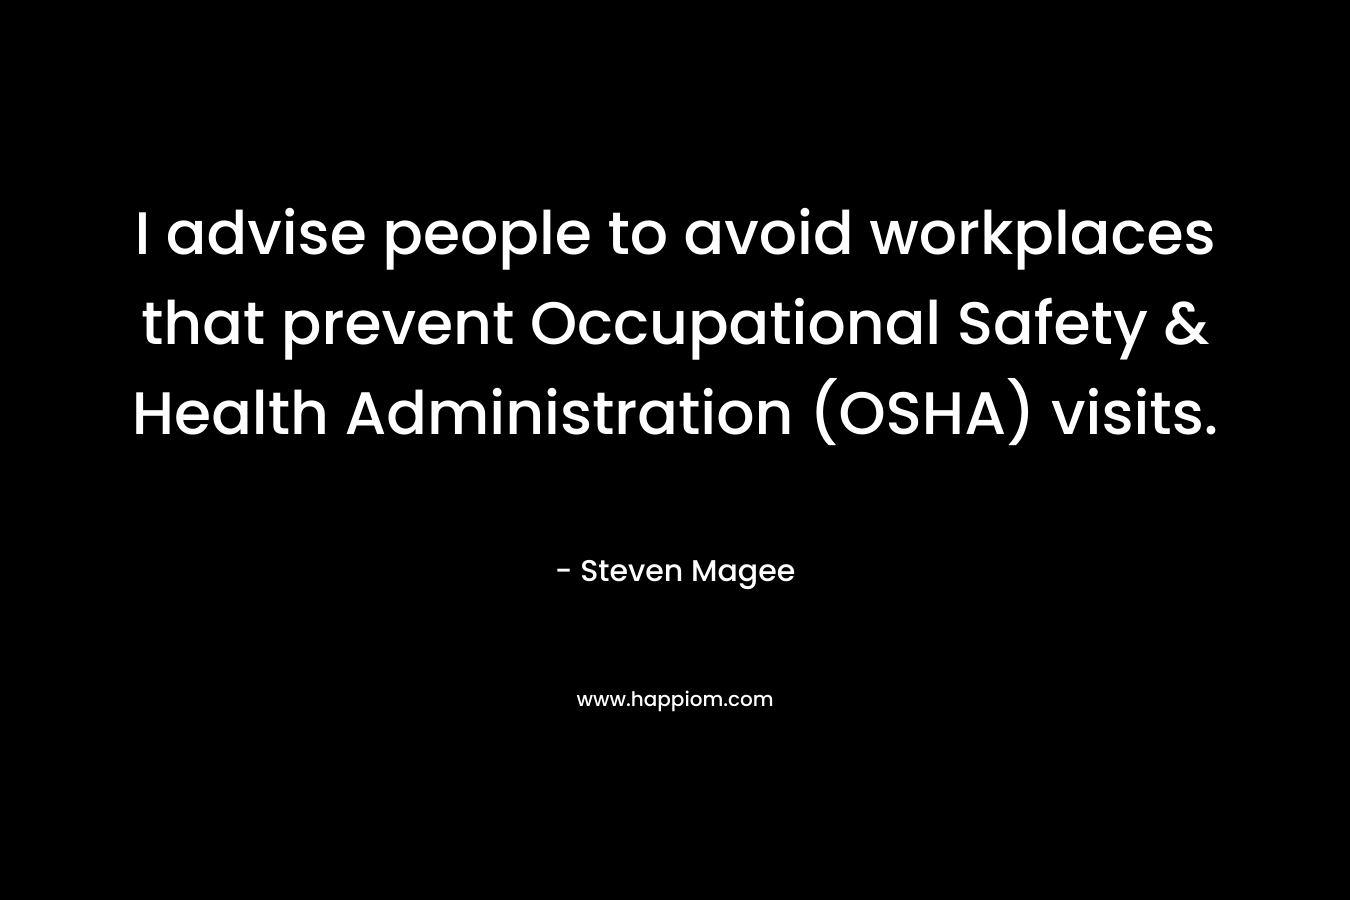 I advise people to avoid workplaces that prevent Occupational Safety & Health Administration (OSHA) visits. – Steven Magee